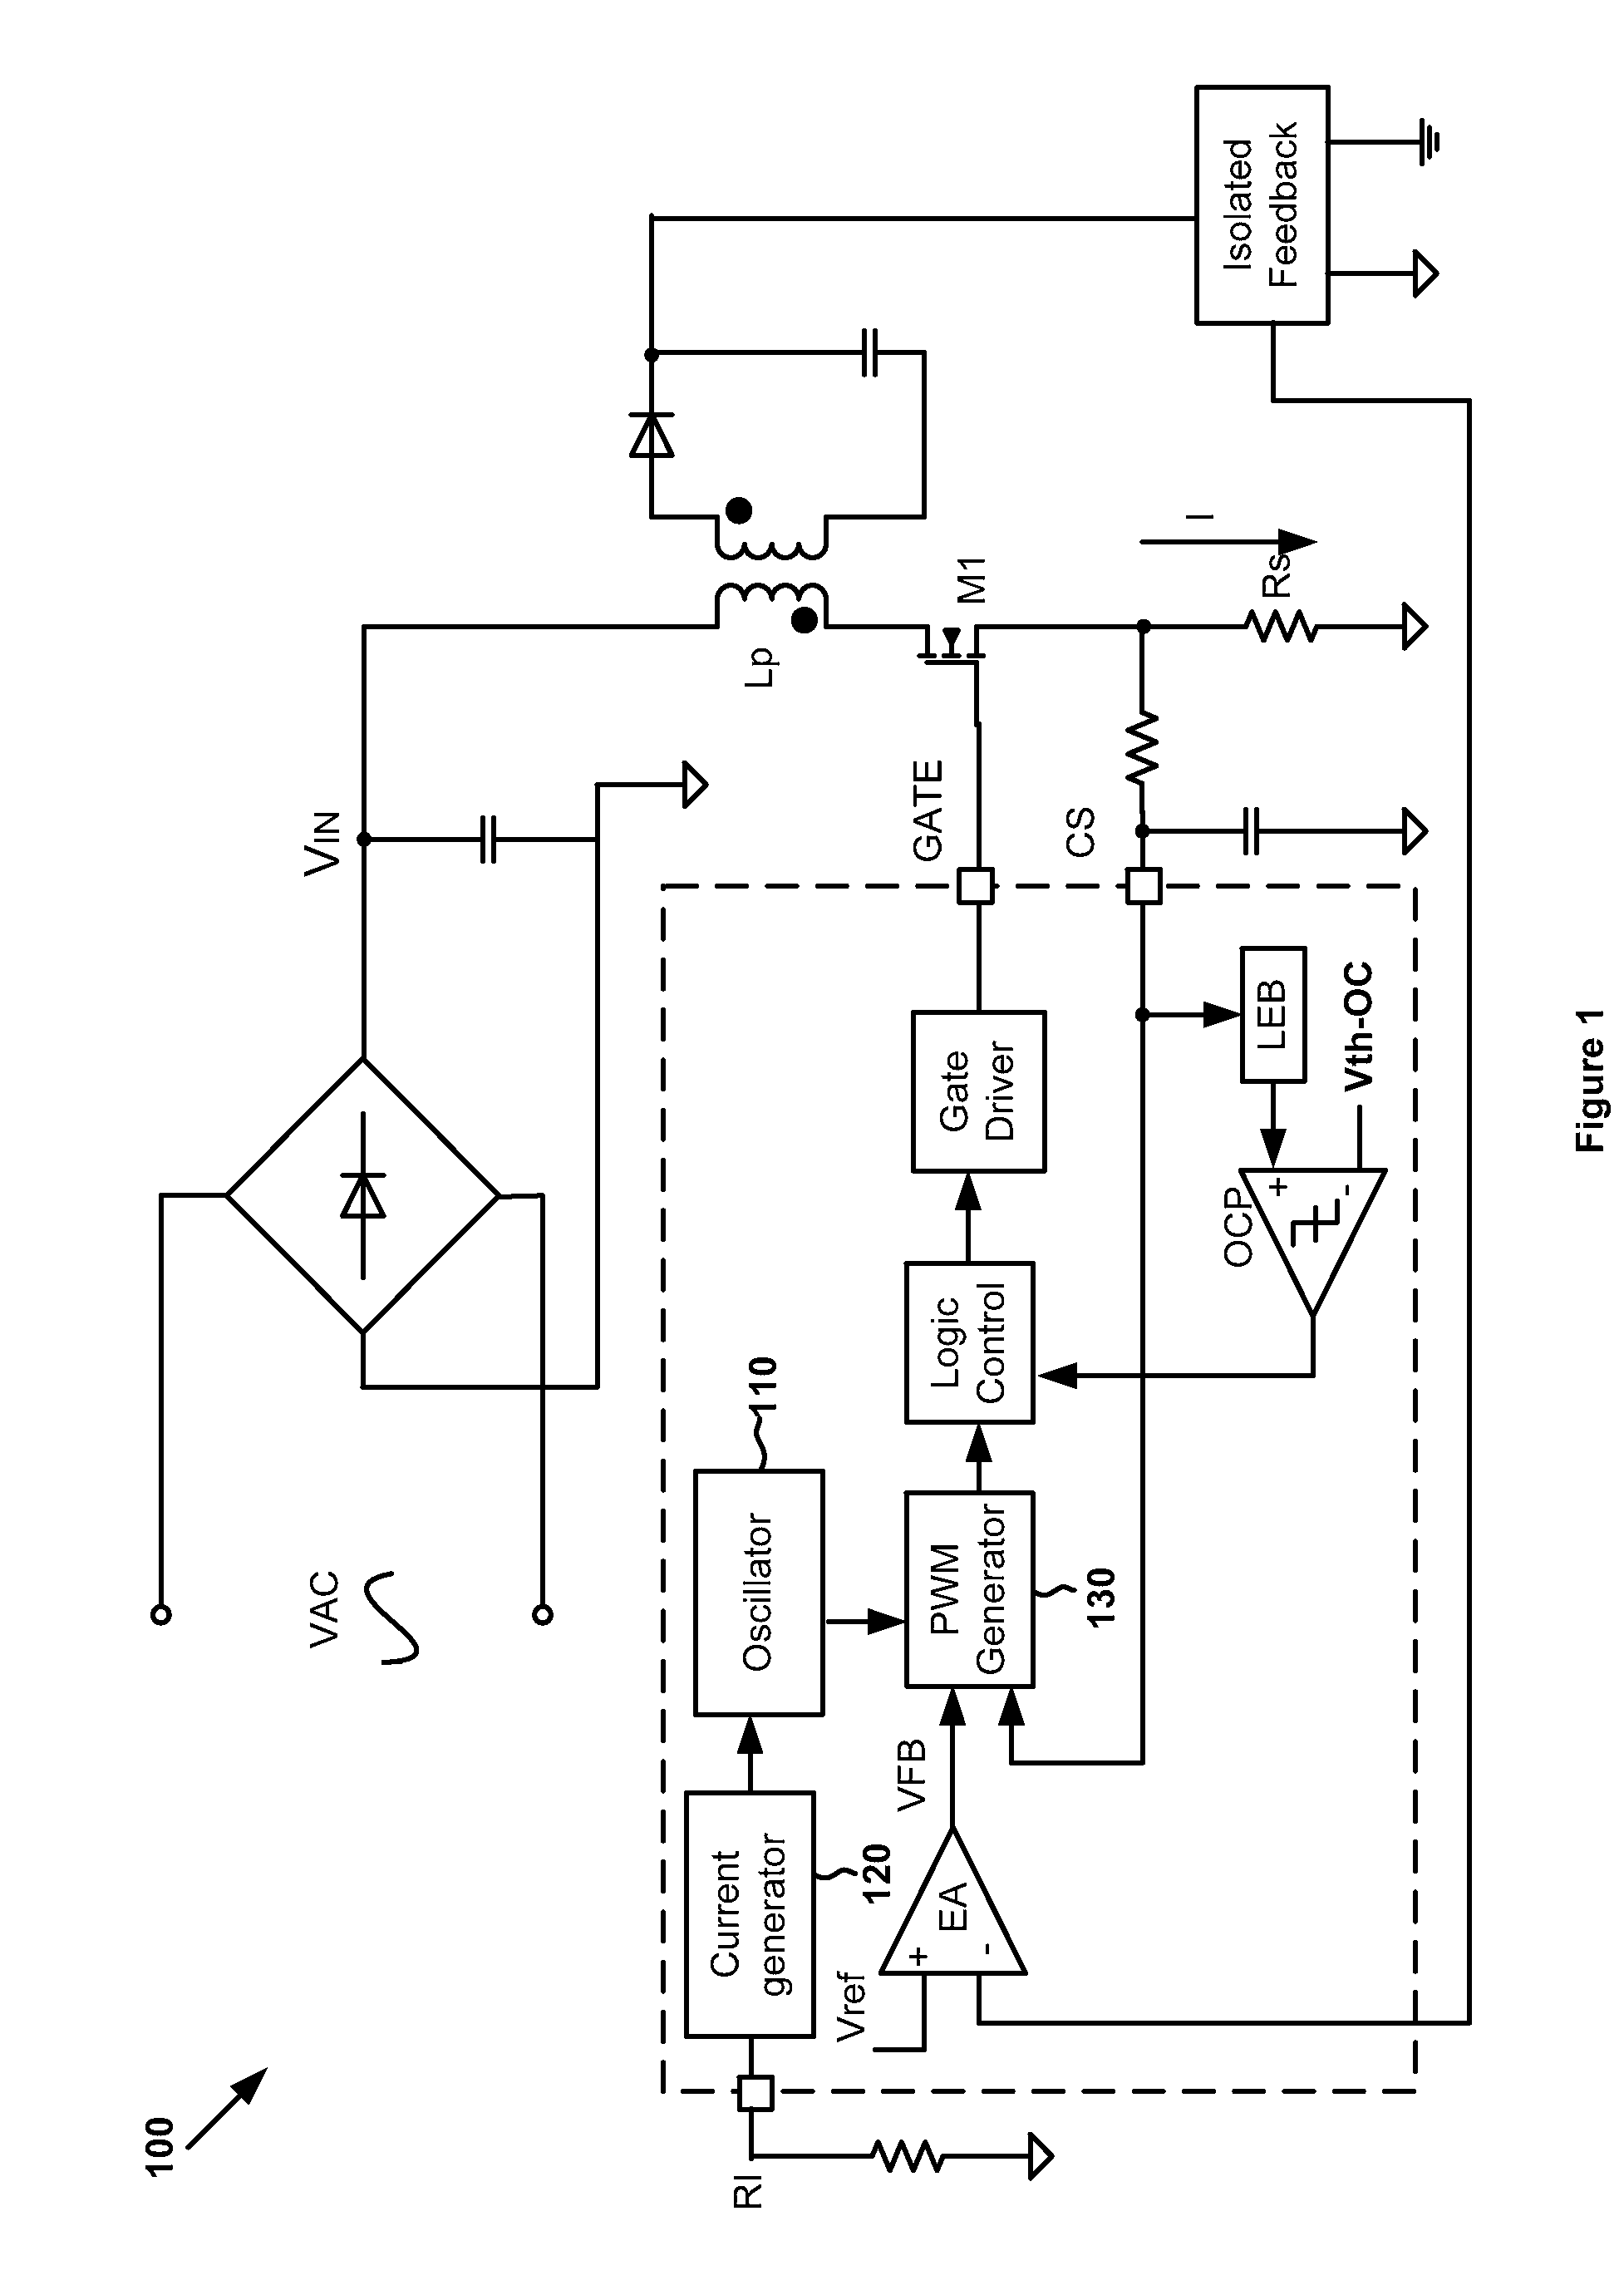 Systems and methods for adaptive switching frequency control in switching-mode power conversion systems